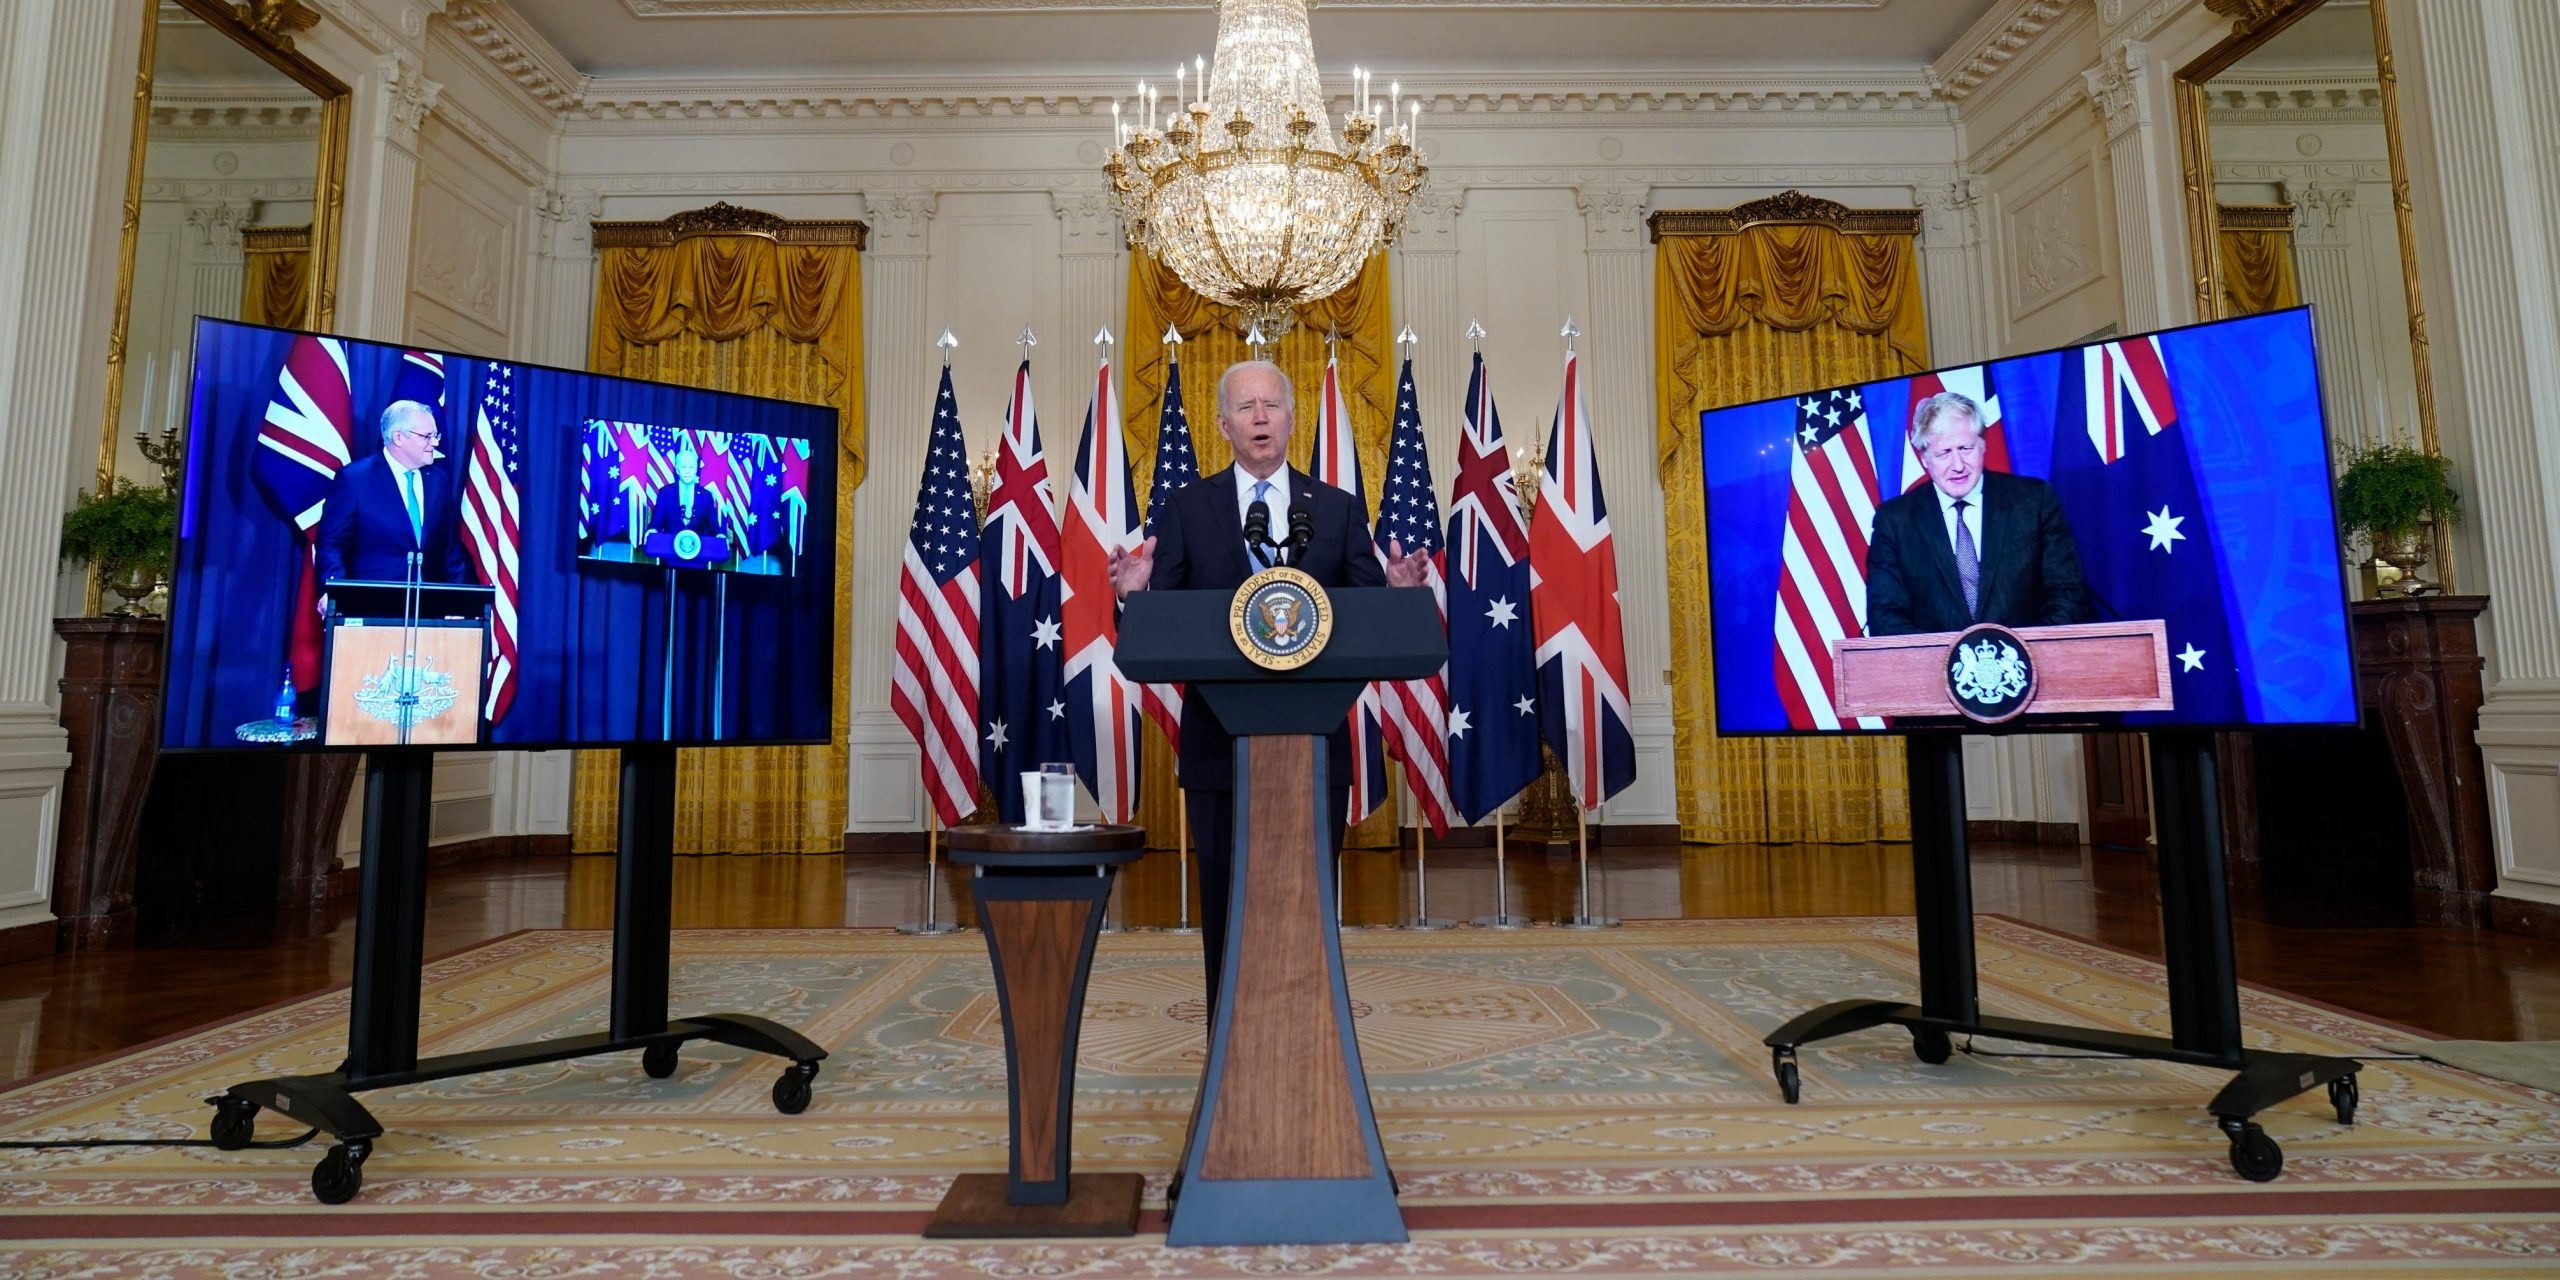 President Joe Biden, joined virtually by Australian Prime Minister Scott Morrison and British Prime Minister Boris Johnson, announces the new trilateral security initiative “AUKUS” at the White House on Wednesday, Sept. 15, 2021.